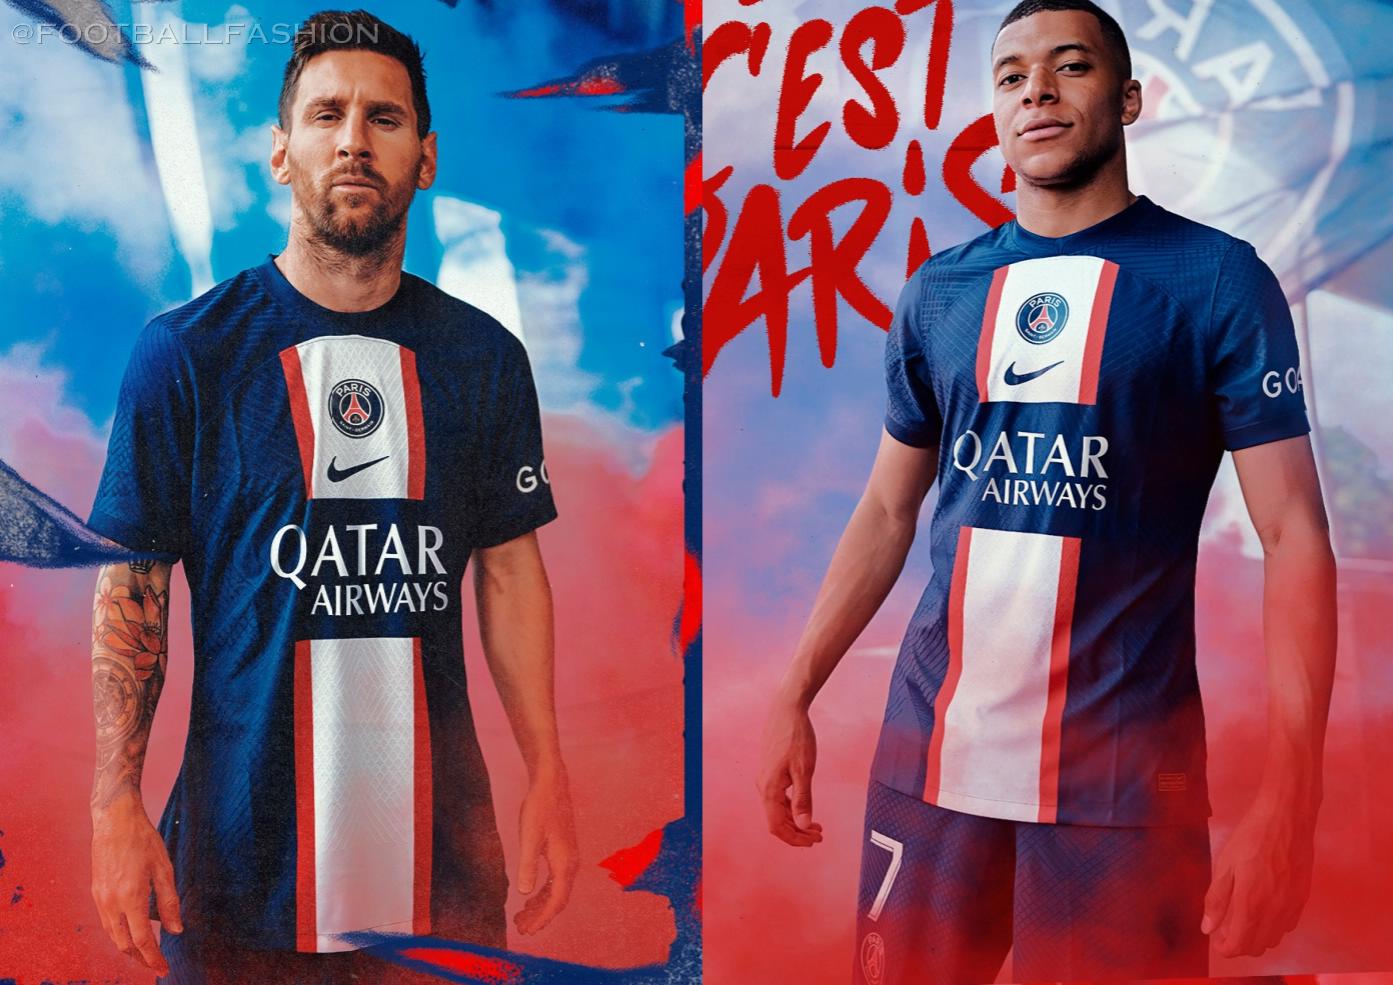 Paris Saint-Germain and Nike launch the new 2023-2024 home jersey